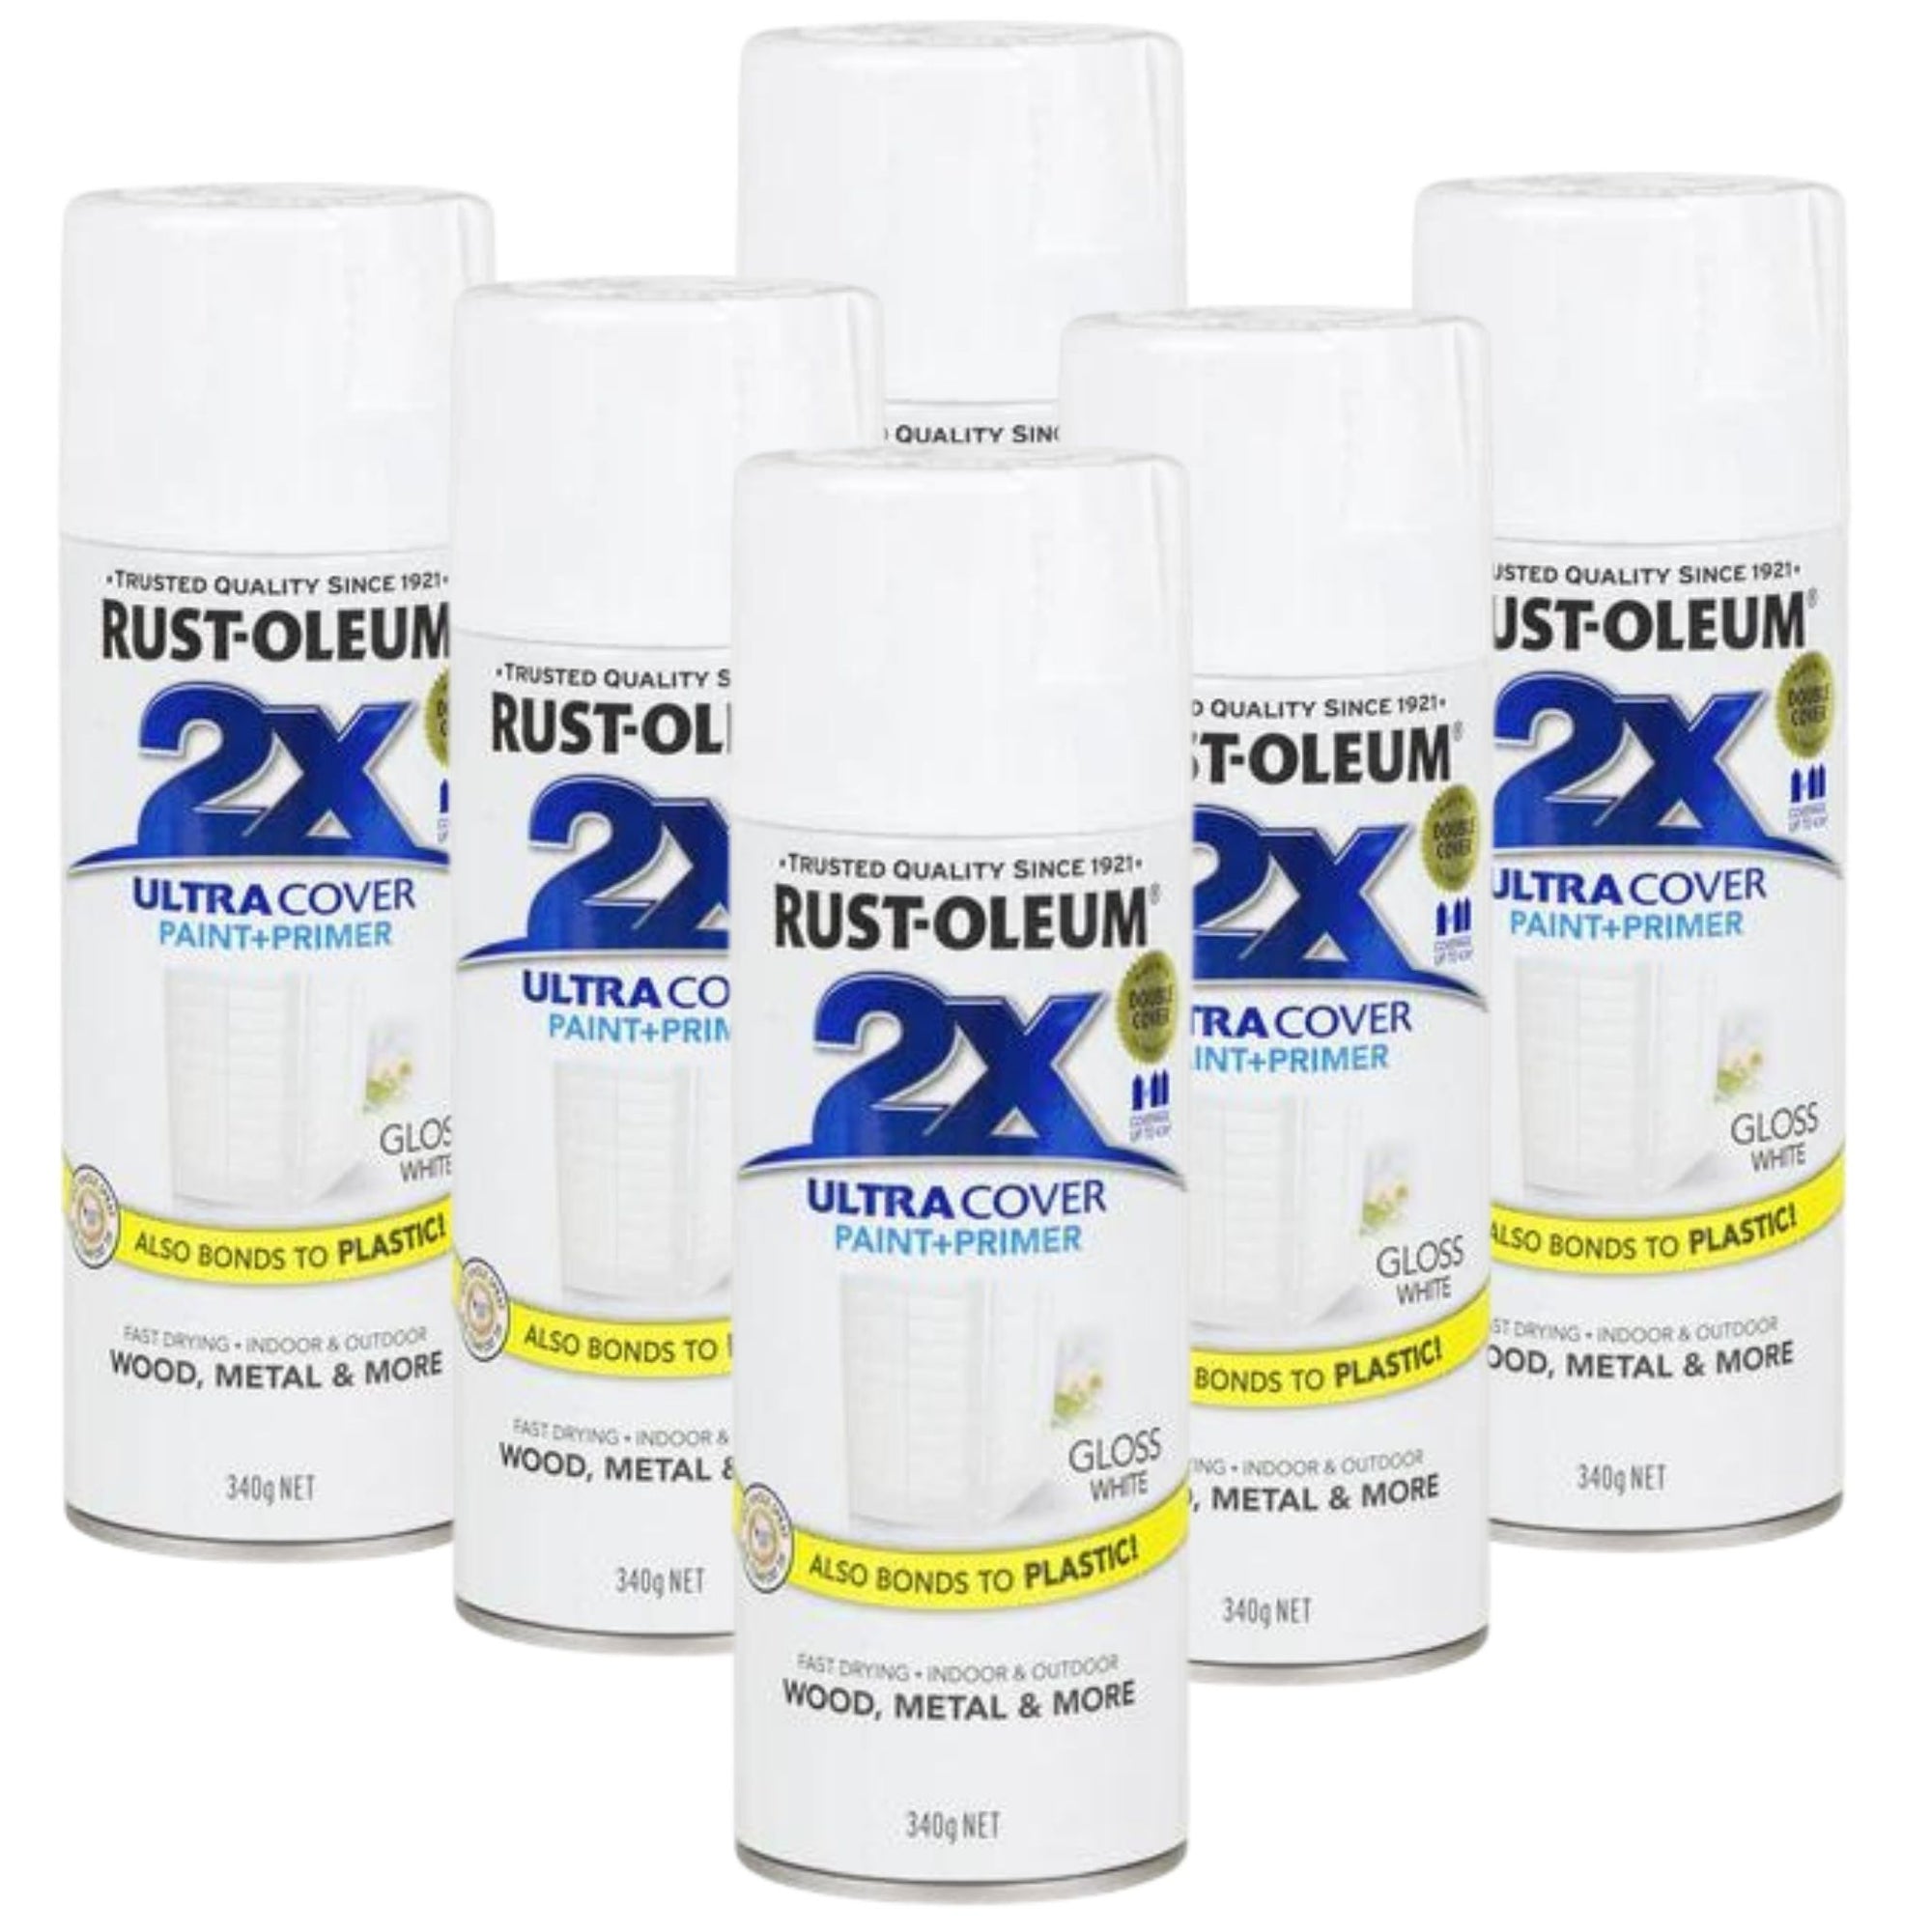 6 PACK) Rustoleum 254860 Specialty Colour Shift Spray Paint - Galaxy Blue